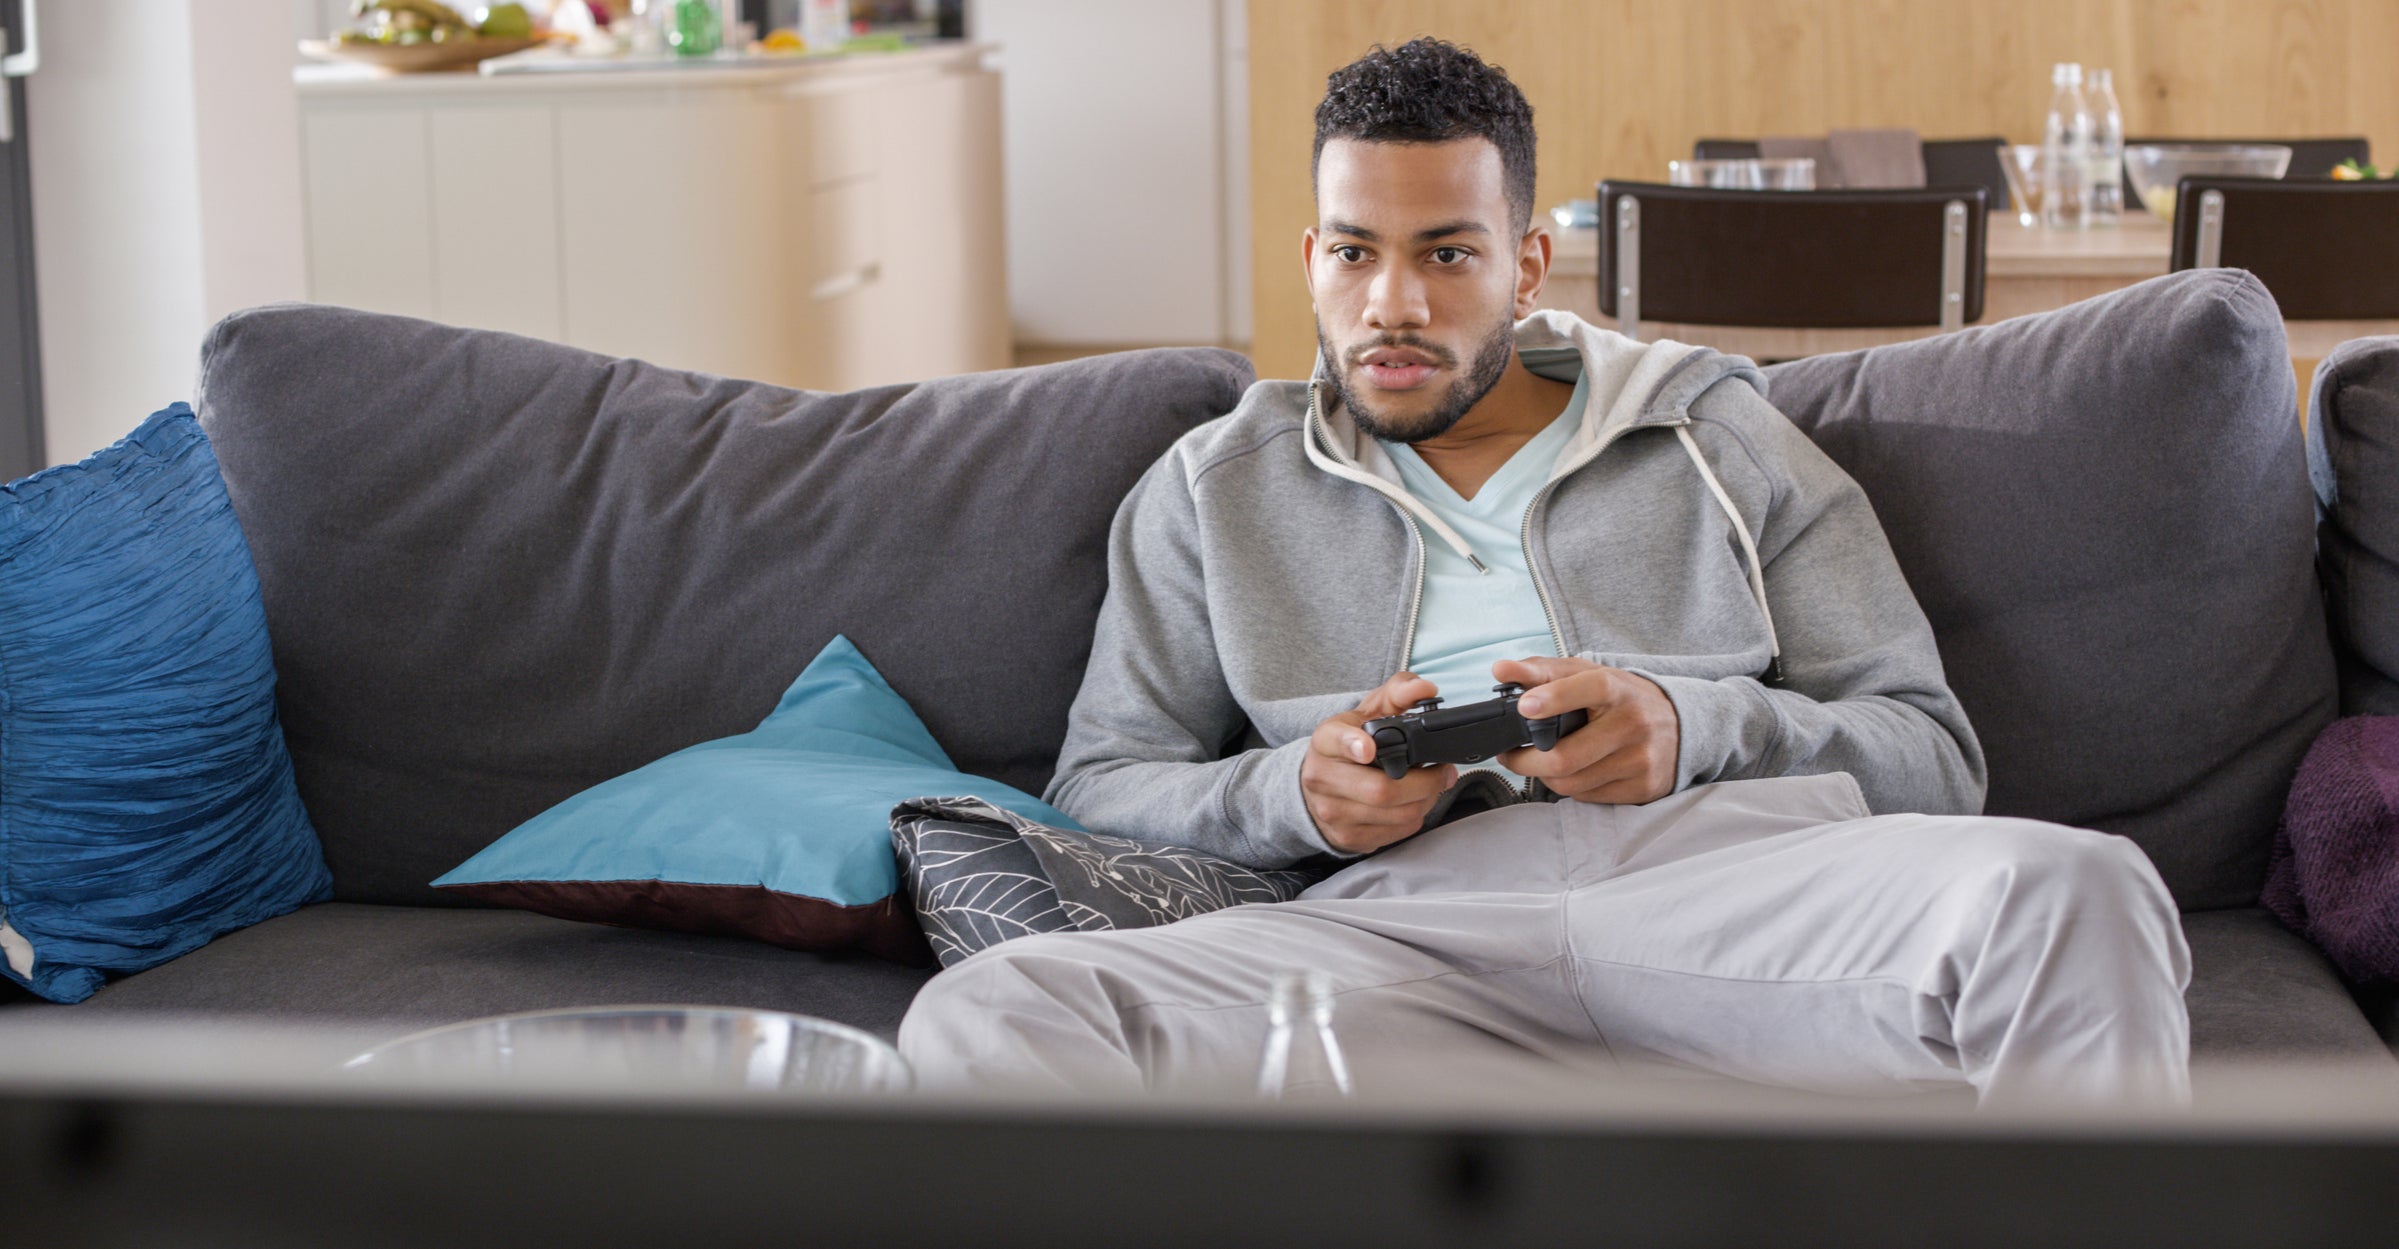 Male friendships are often rooted in ‘shoulder-to-shoulder’ interactions, such as playing video games